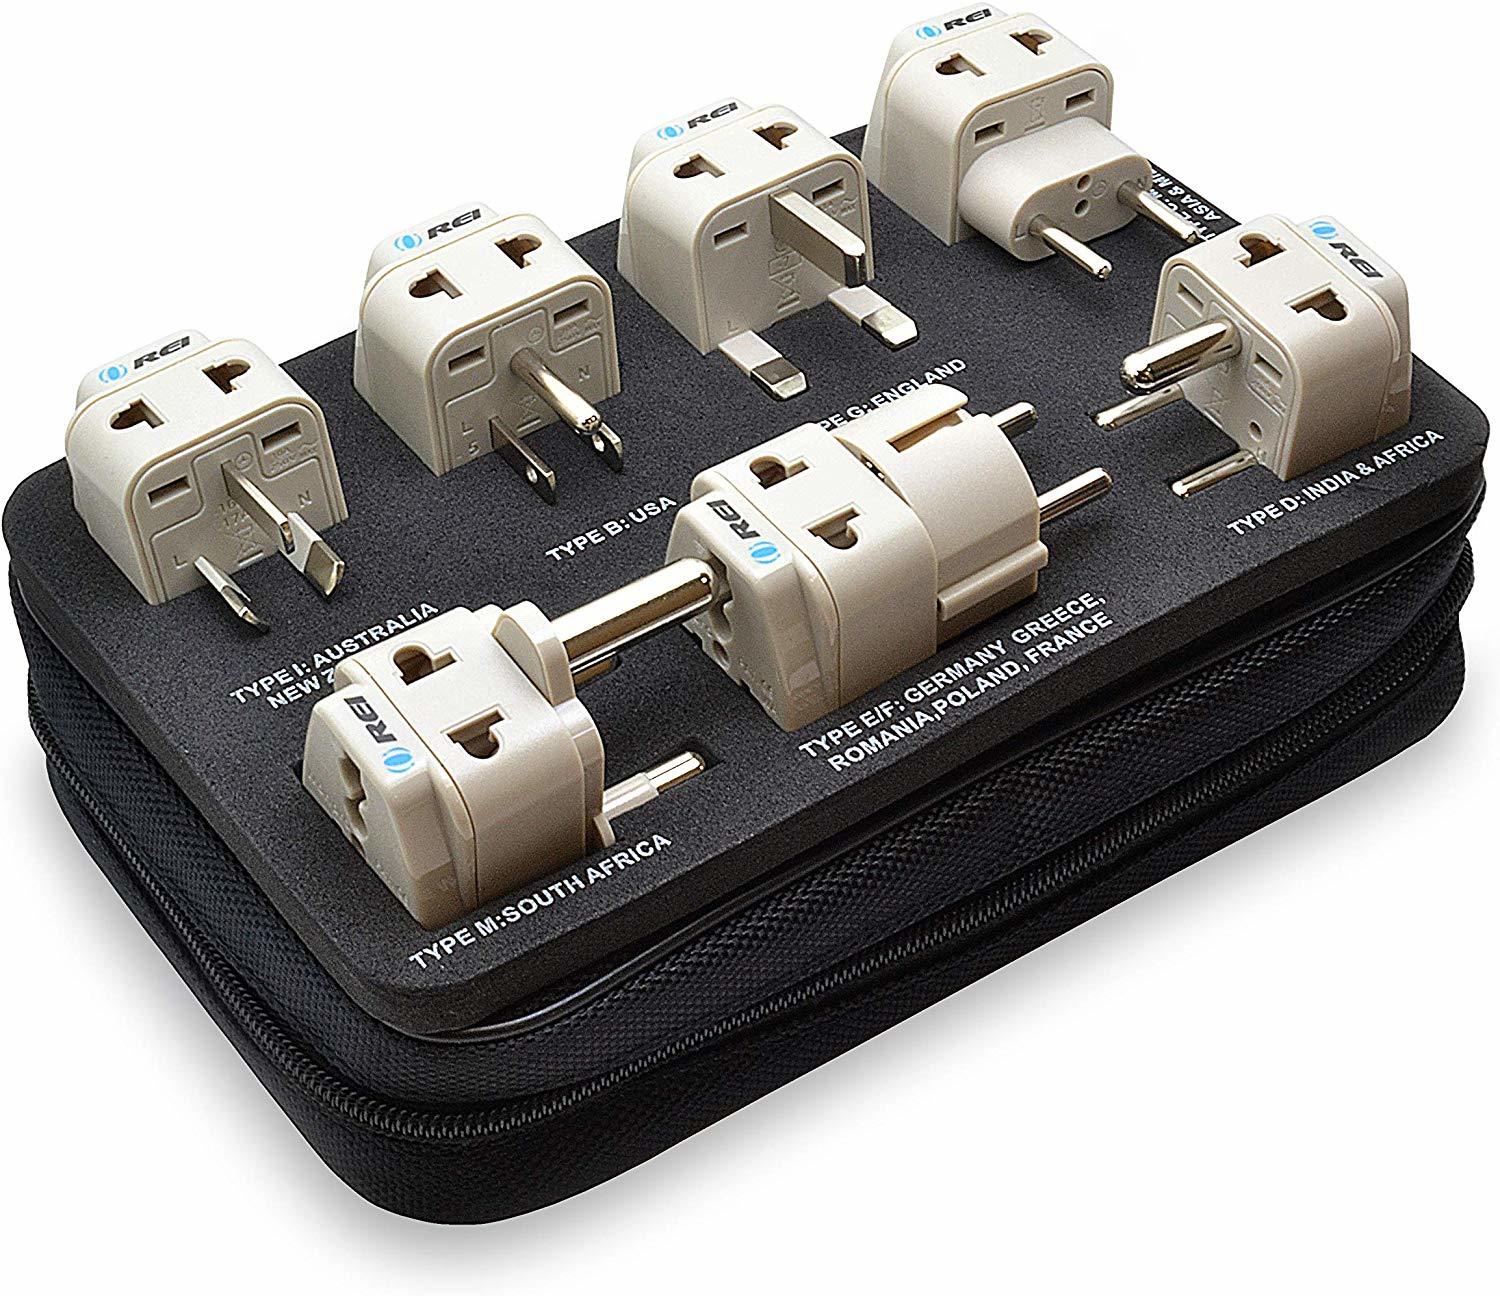 How To Use A Travel Adapter